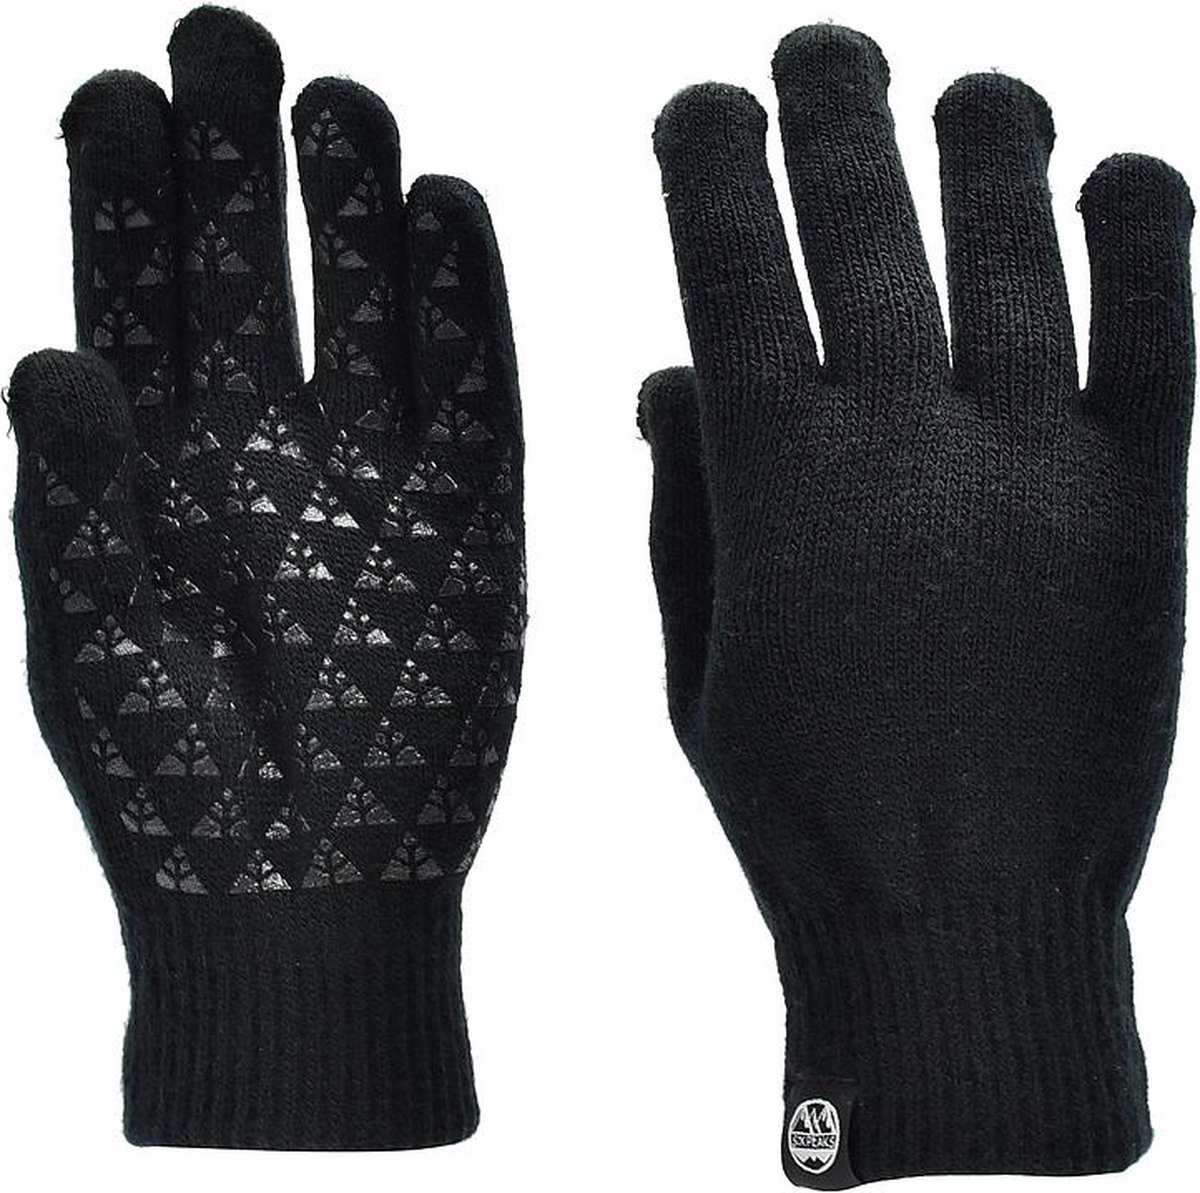 Six Peaks Winter Knitted Gloves